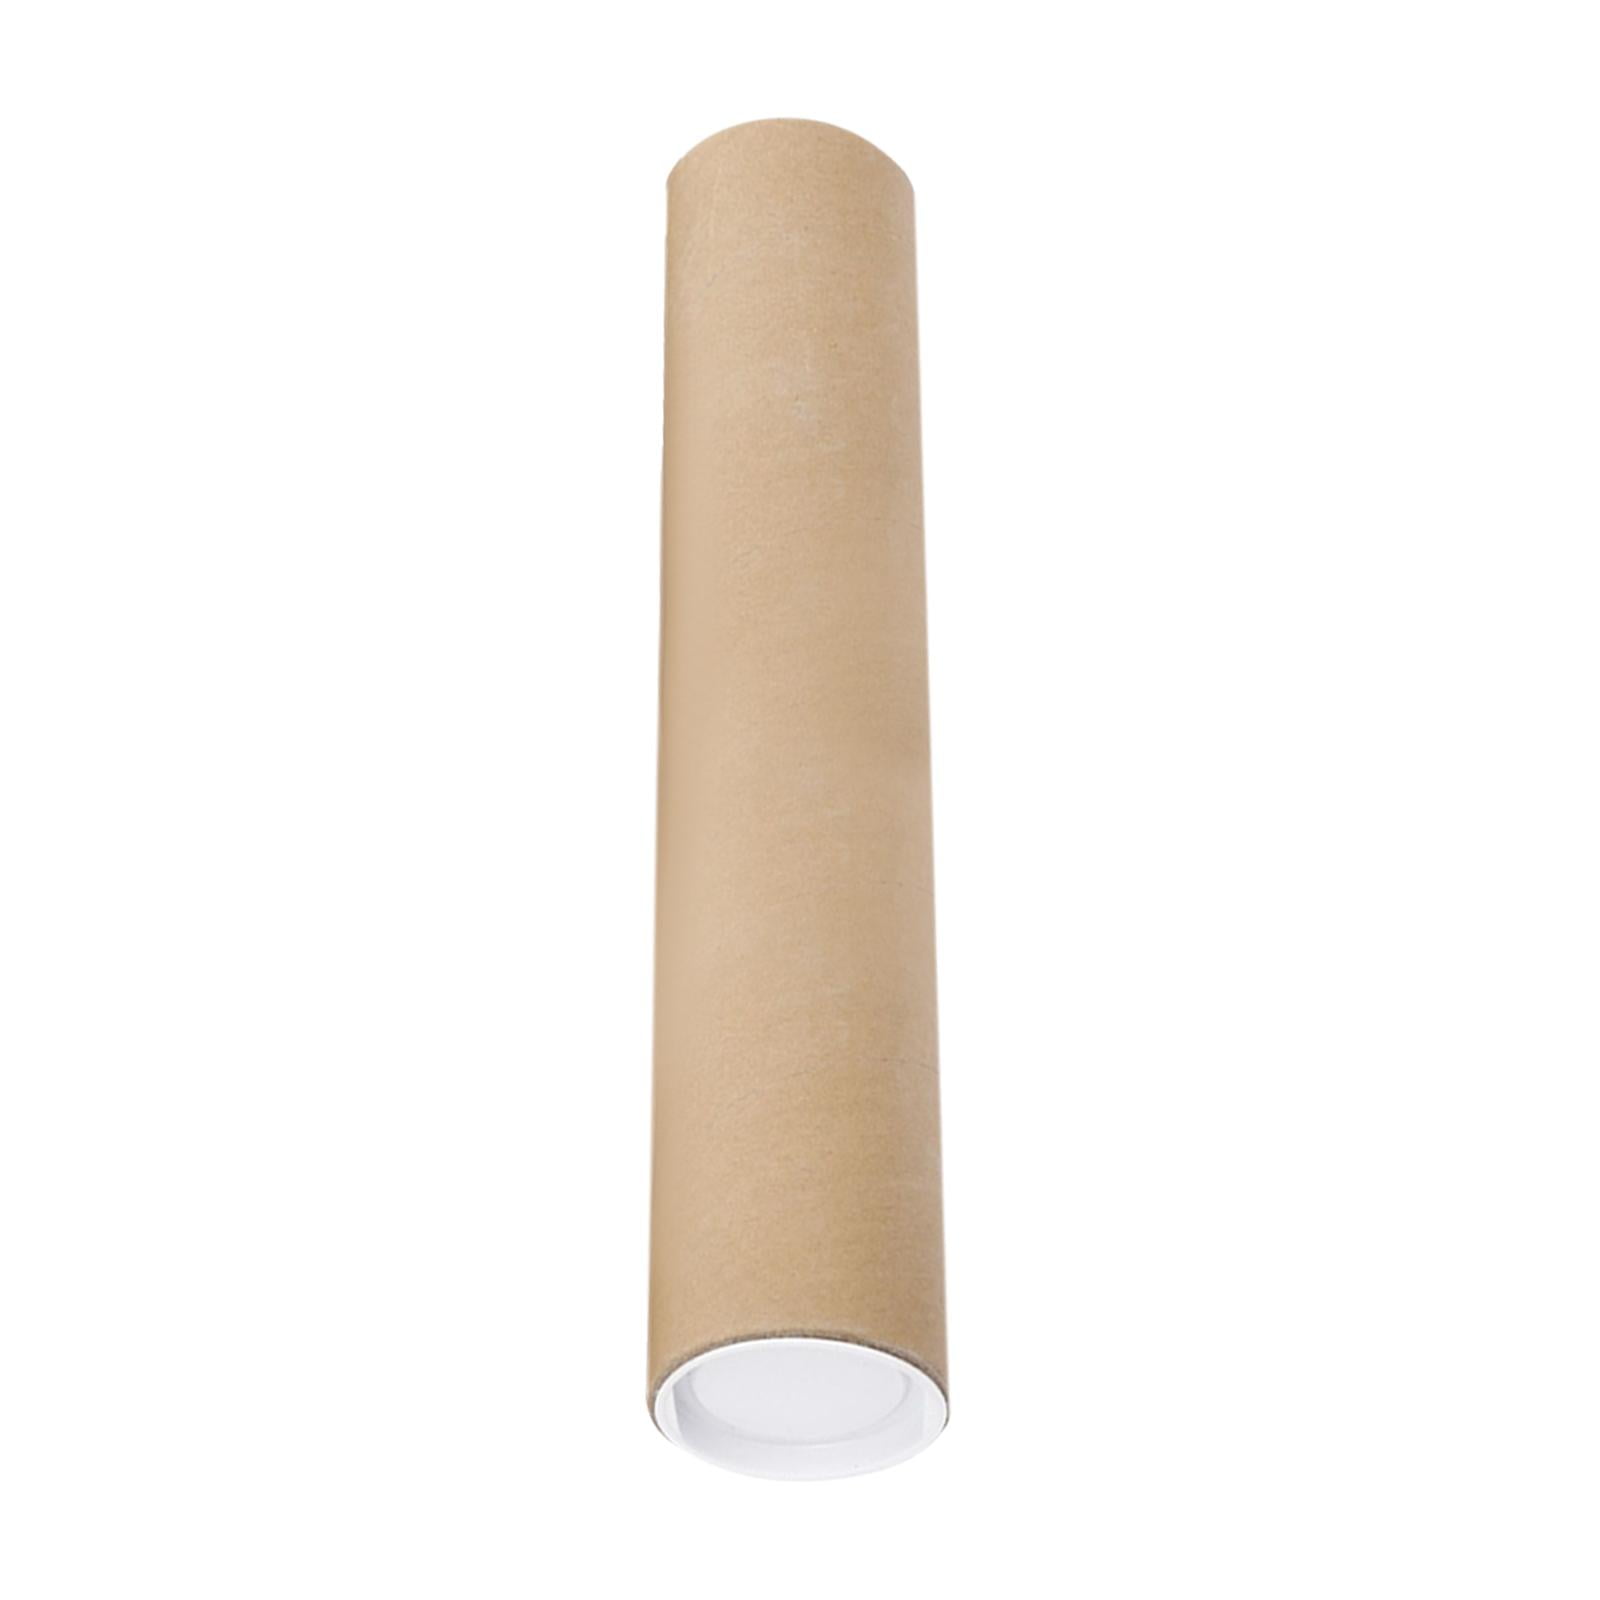 Adjustable poster tube: Check Out Quality Park Mailing Tube, 36 x 3 Inches,  White, 1 Tube (46039) for $2.00